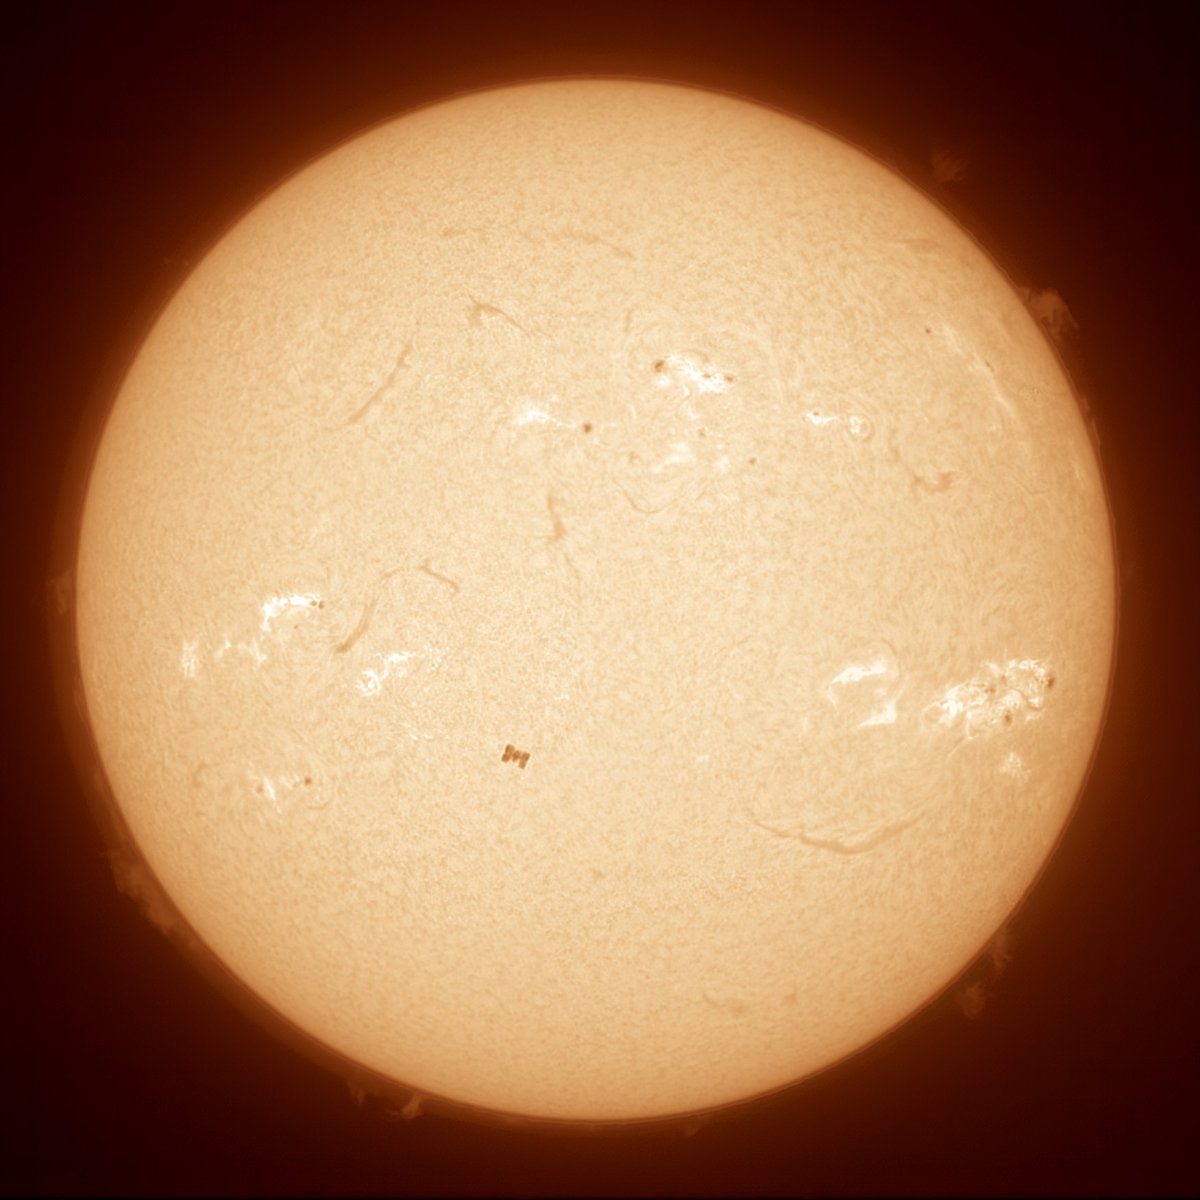 🌞✨ It's not a sunspot, it's the International Space Station! 🛰 Astrophotographer Kevin Gill seized the perfect moment during his lunch break to capture this breathtaking transit of the ISS across the Sun. #SpaceStation #Astrophotography